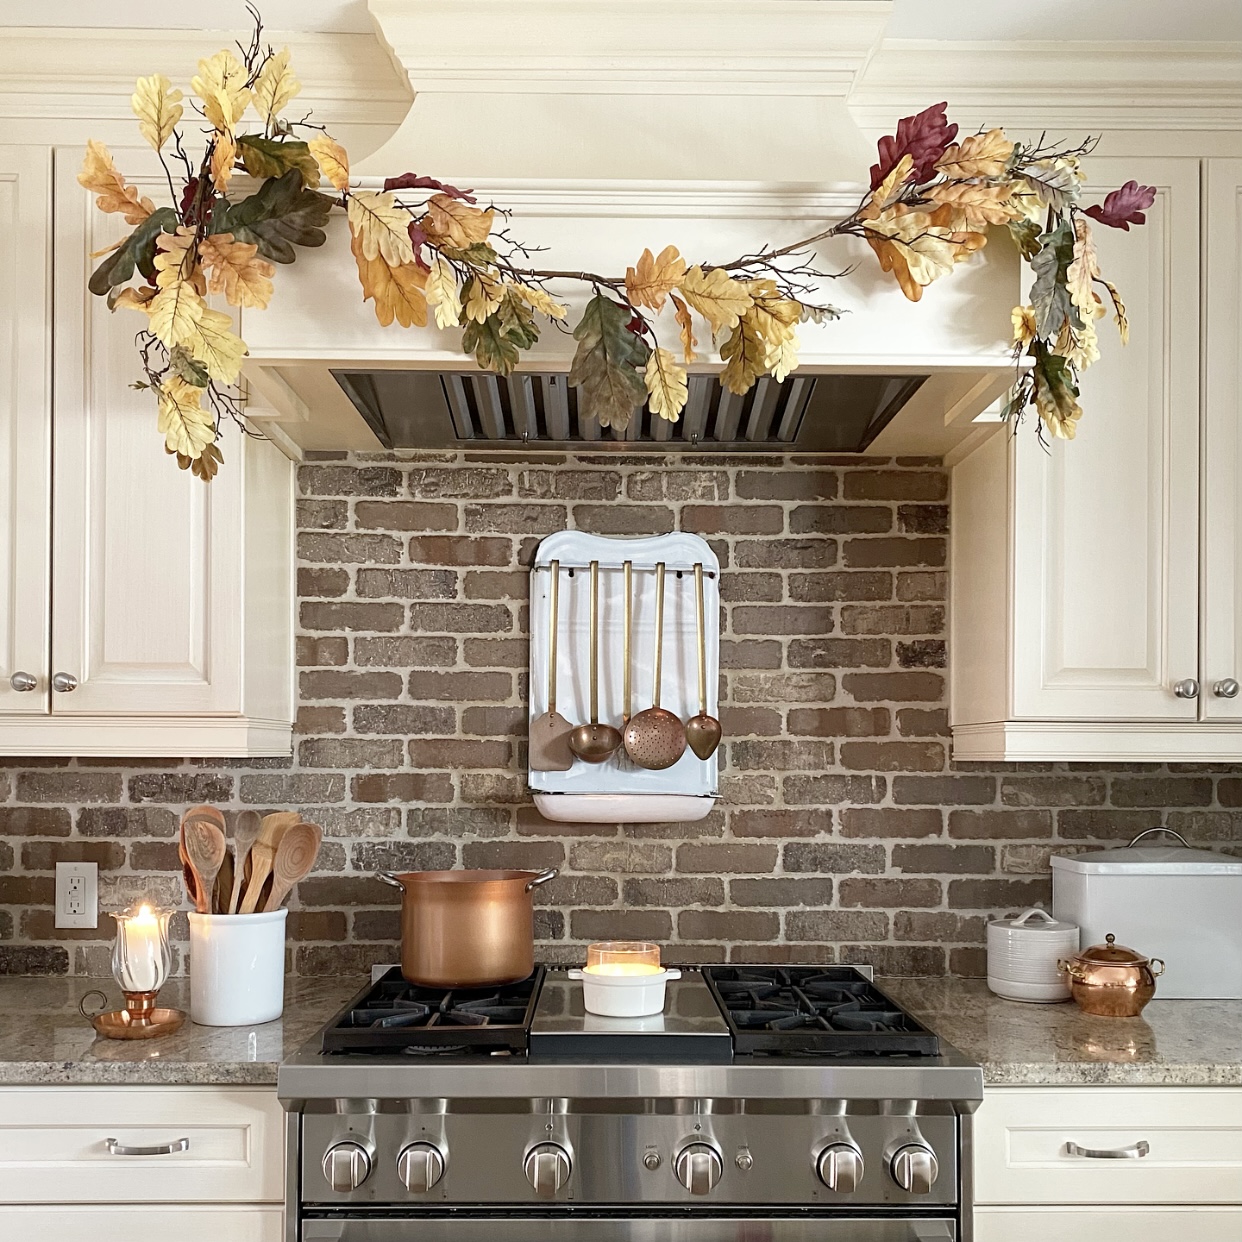 Kitchen hood with Fall garland on it. Candles and copper on and around the stove.